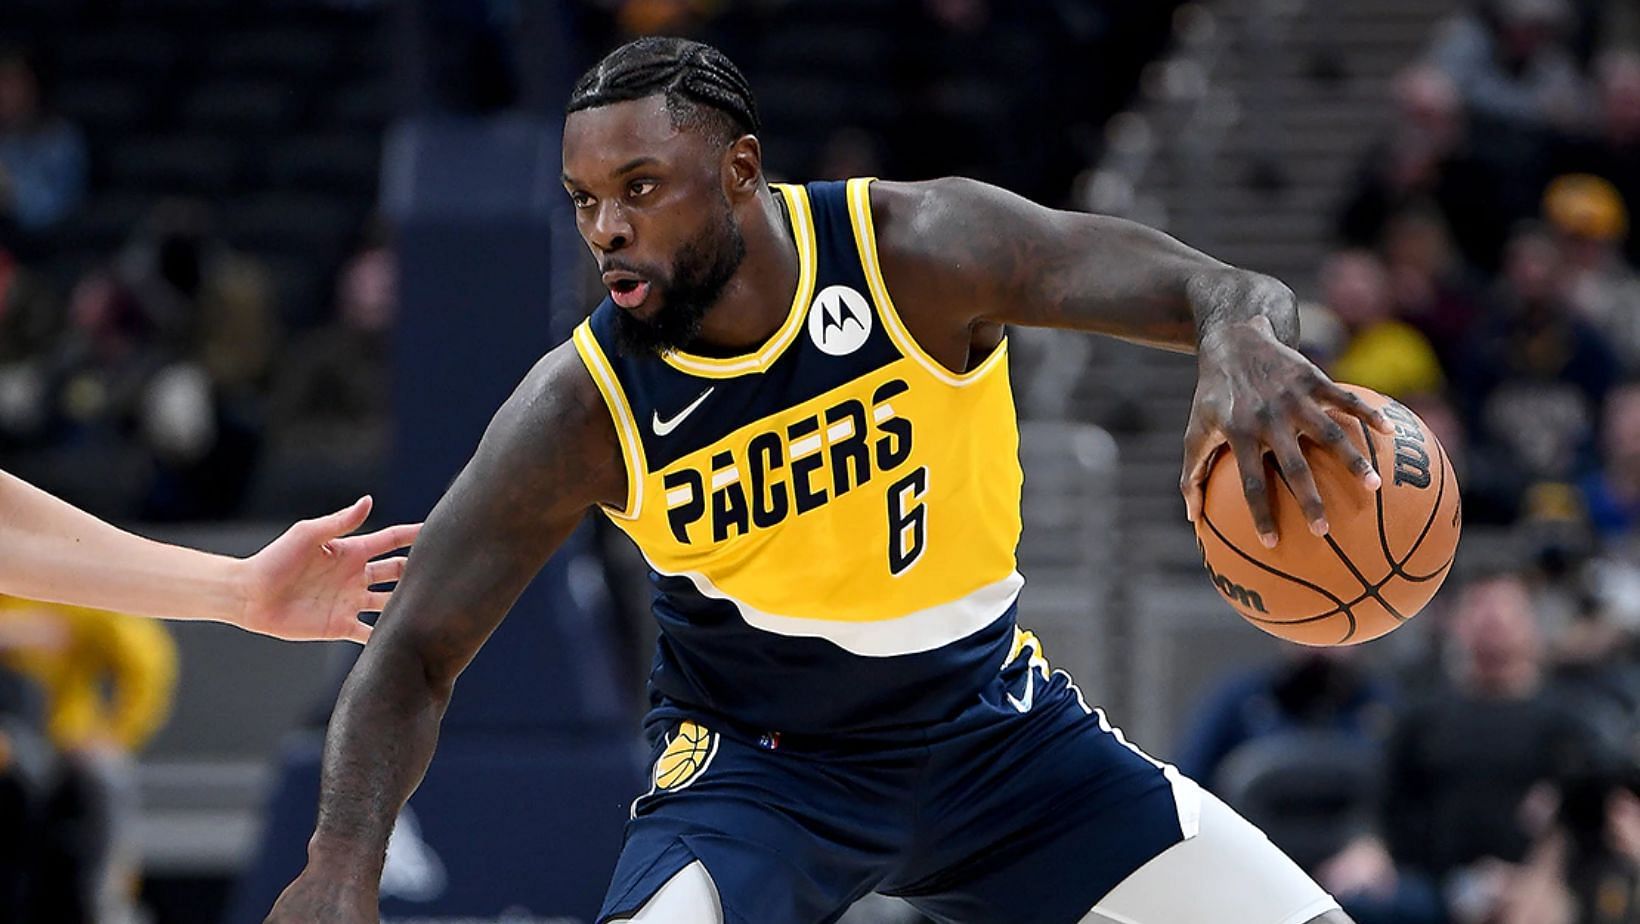 Lance Stephenson wants to play for either the Brooklyn Nets or New York Knicks.